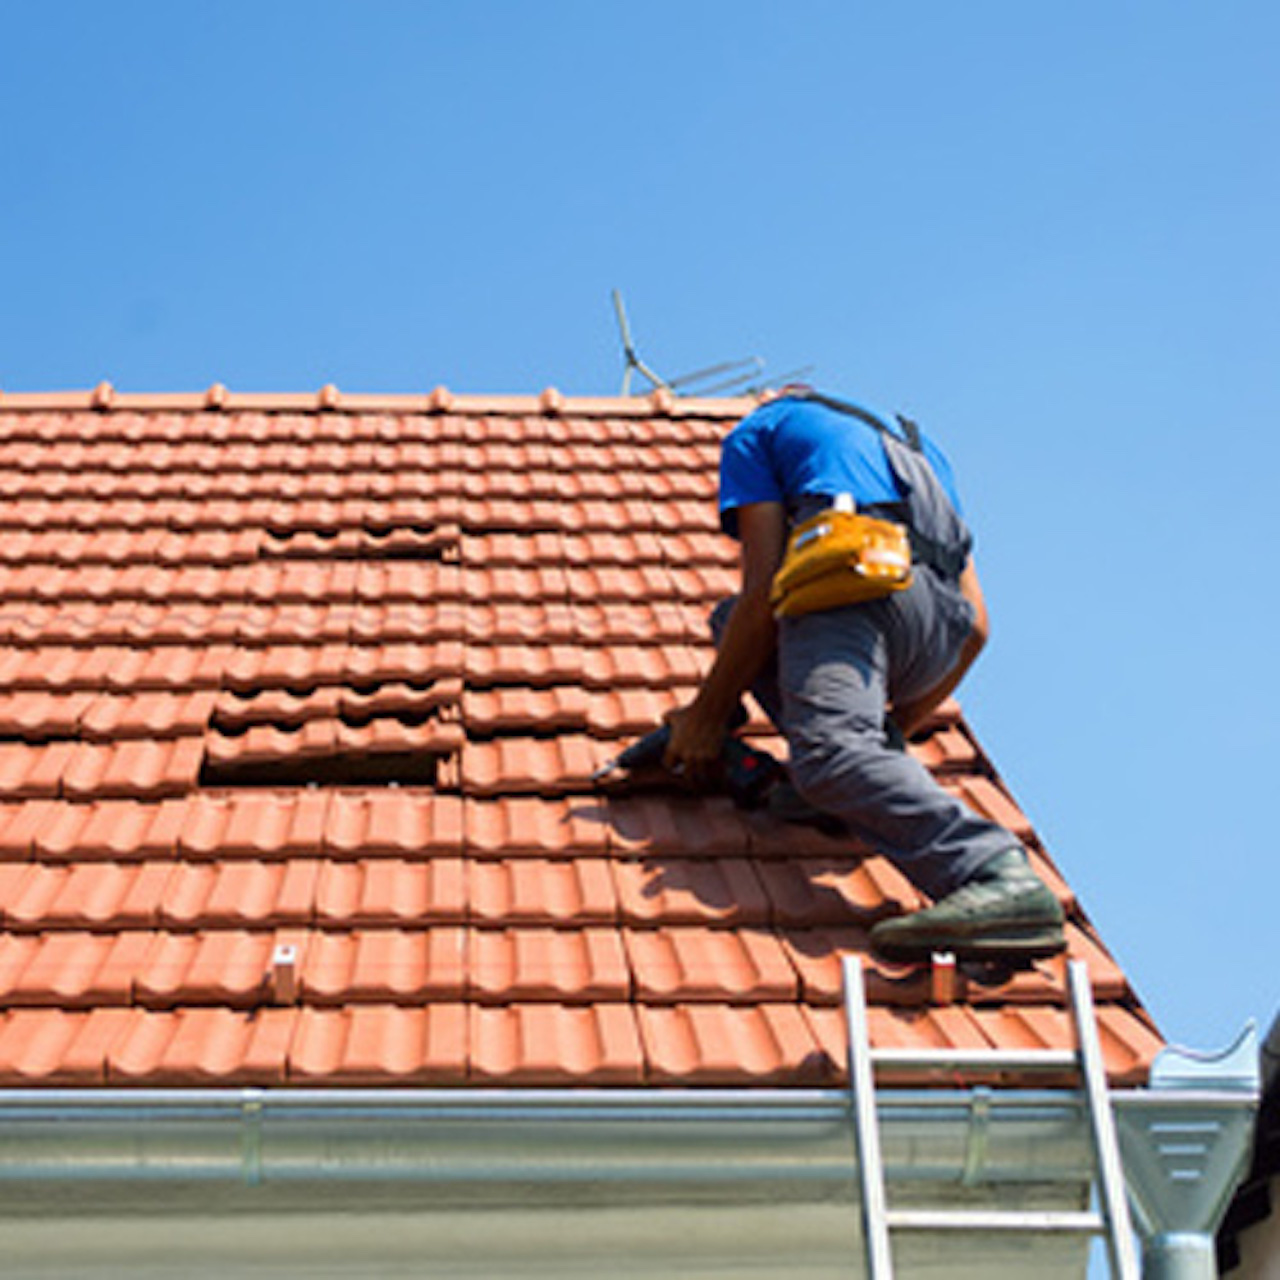 When should I replace my roof?